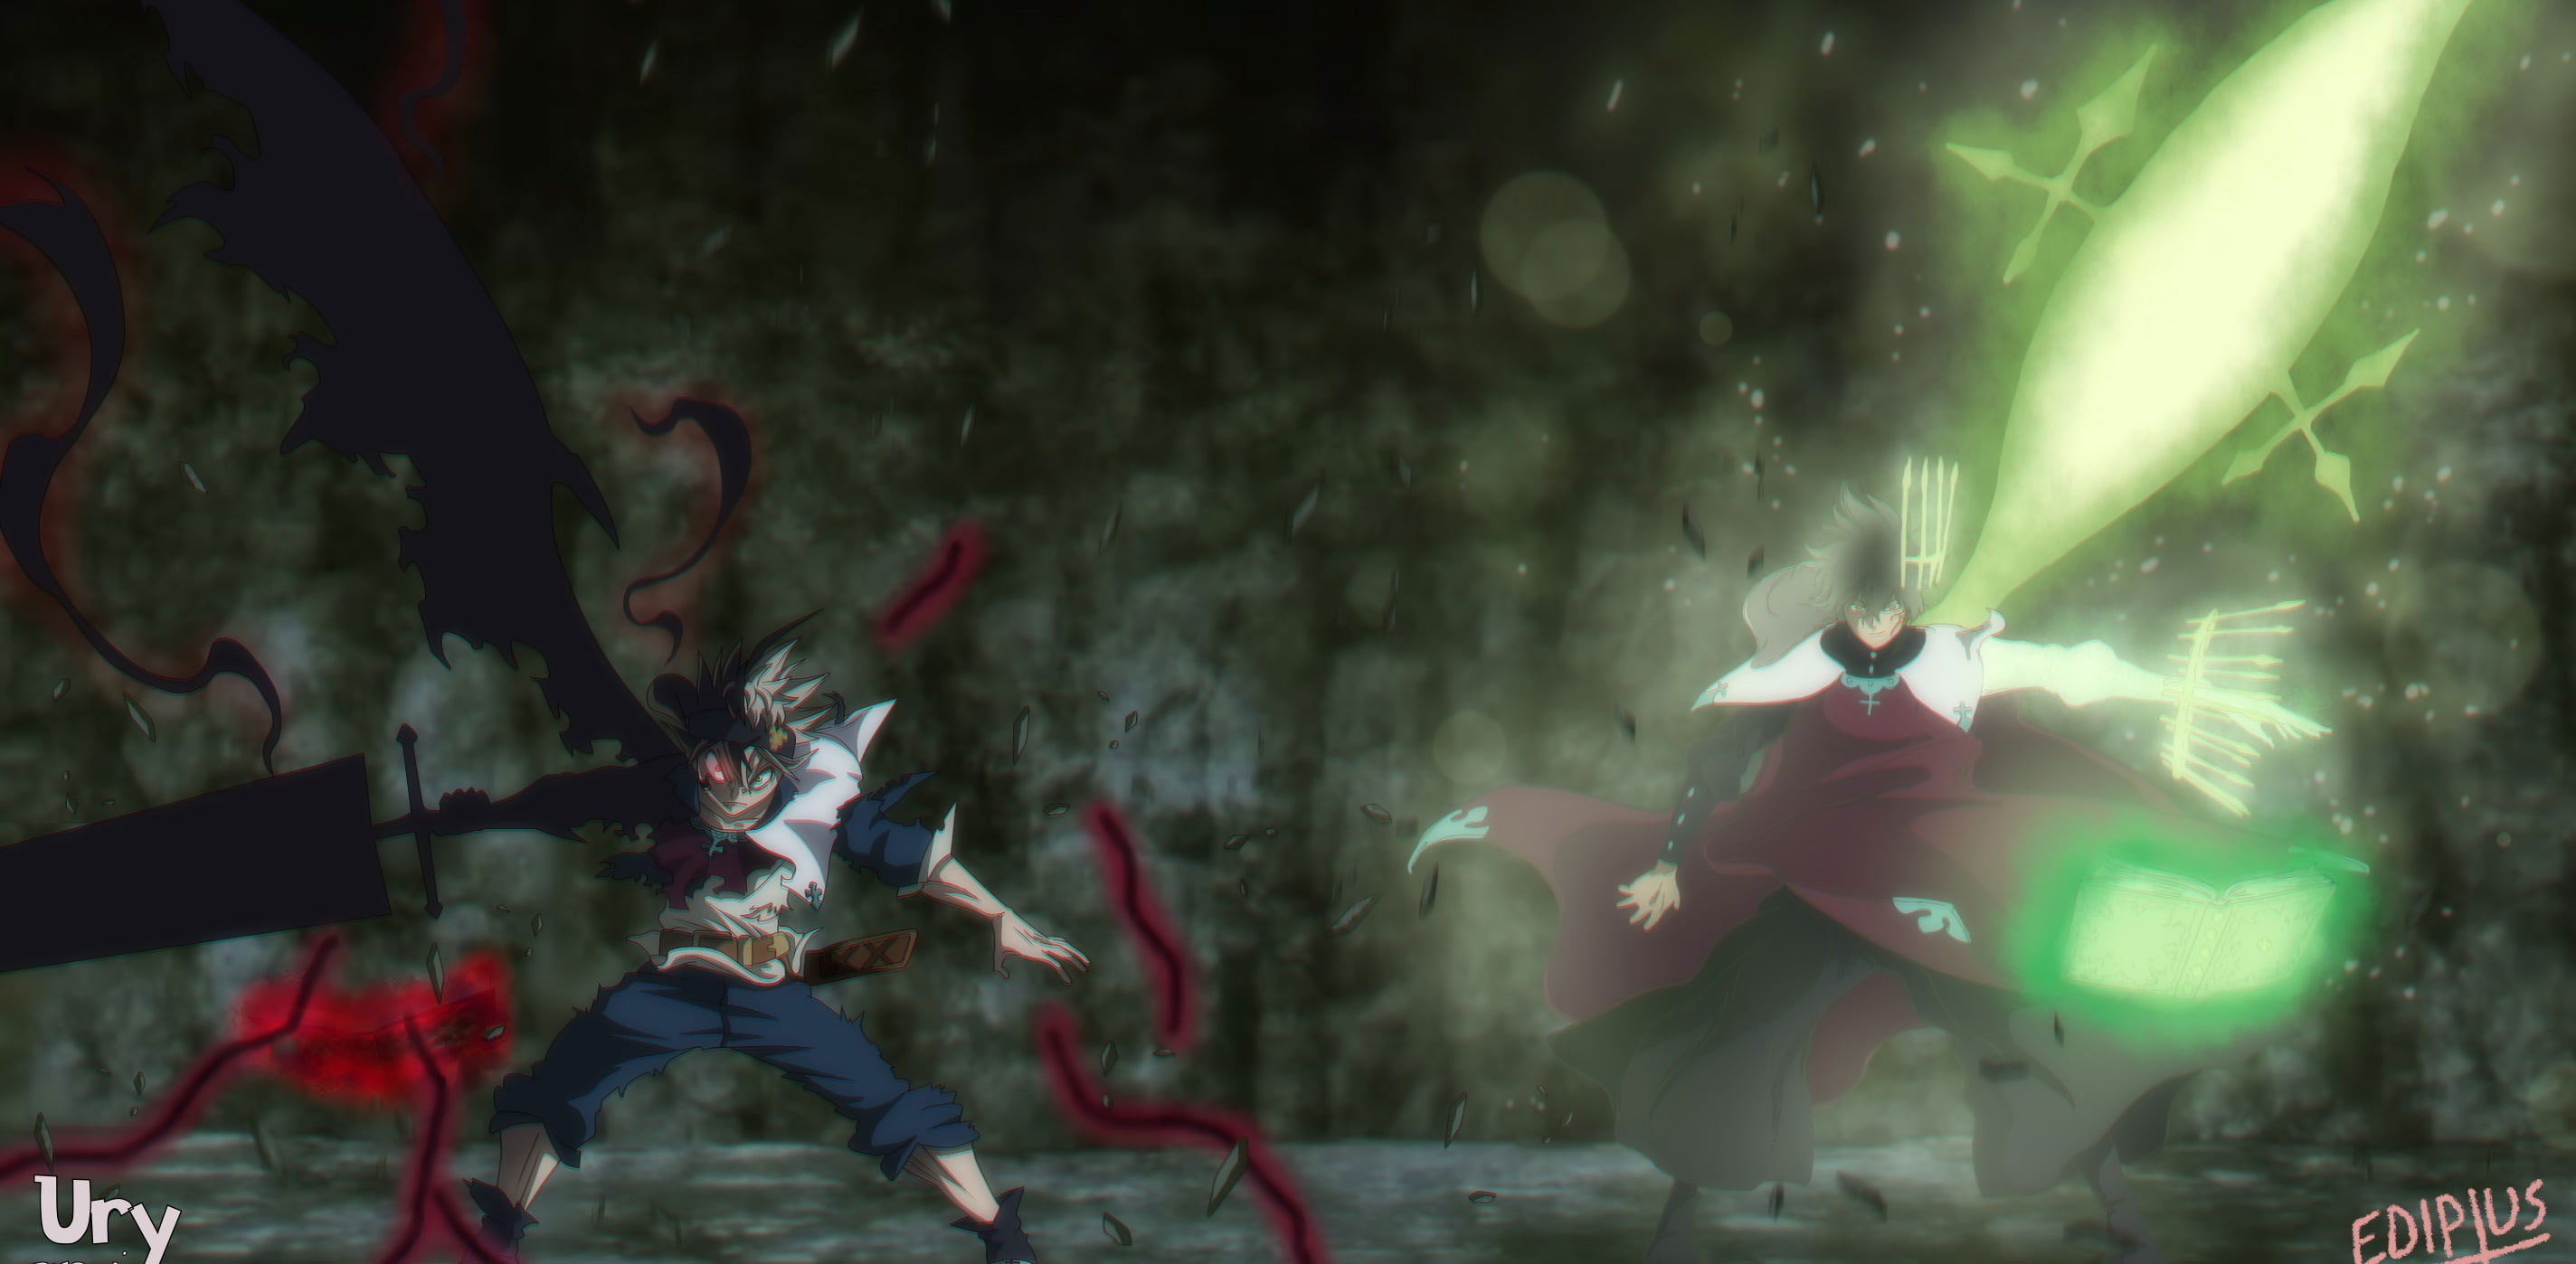 3840x2160 Asta (Black Clover), Yuno (Black Clover) wallpaper PNG -  Coolwallpapers.me!